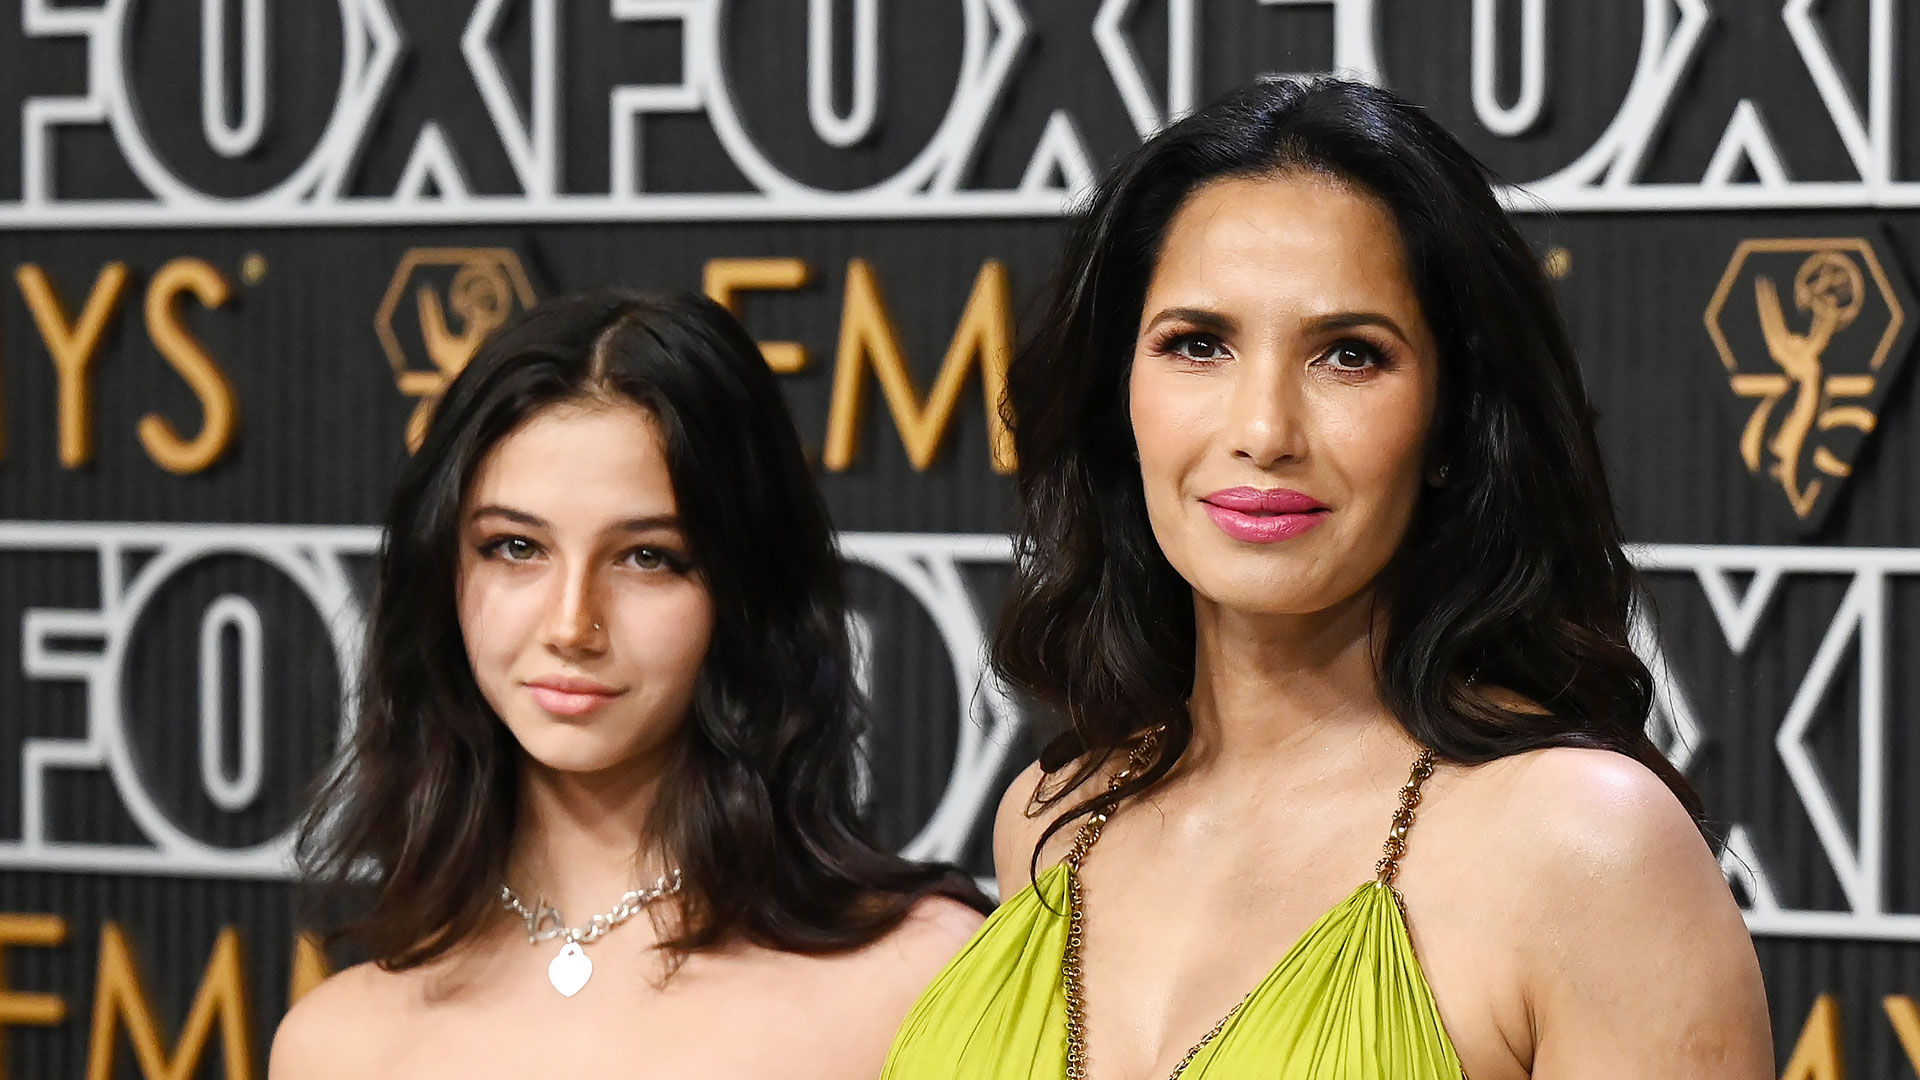 Padma Lakshmi felt ‘shamed’ over paternity questions when she got pregnant with her daughter ‘between relationships’ [Video]